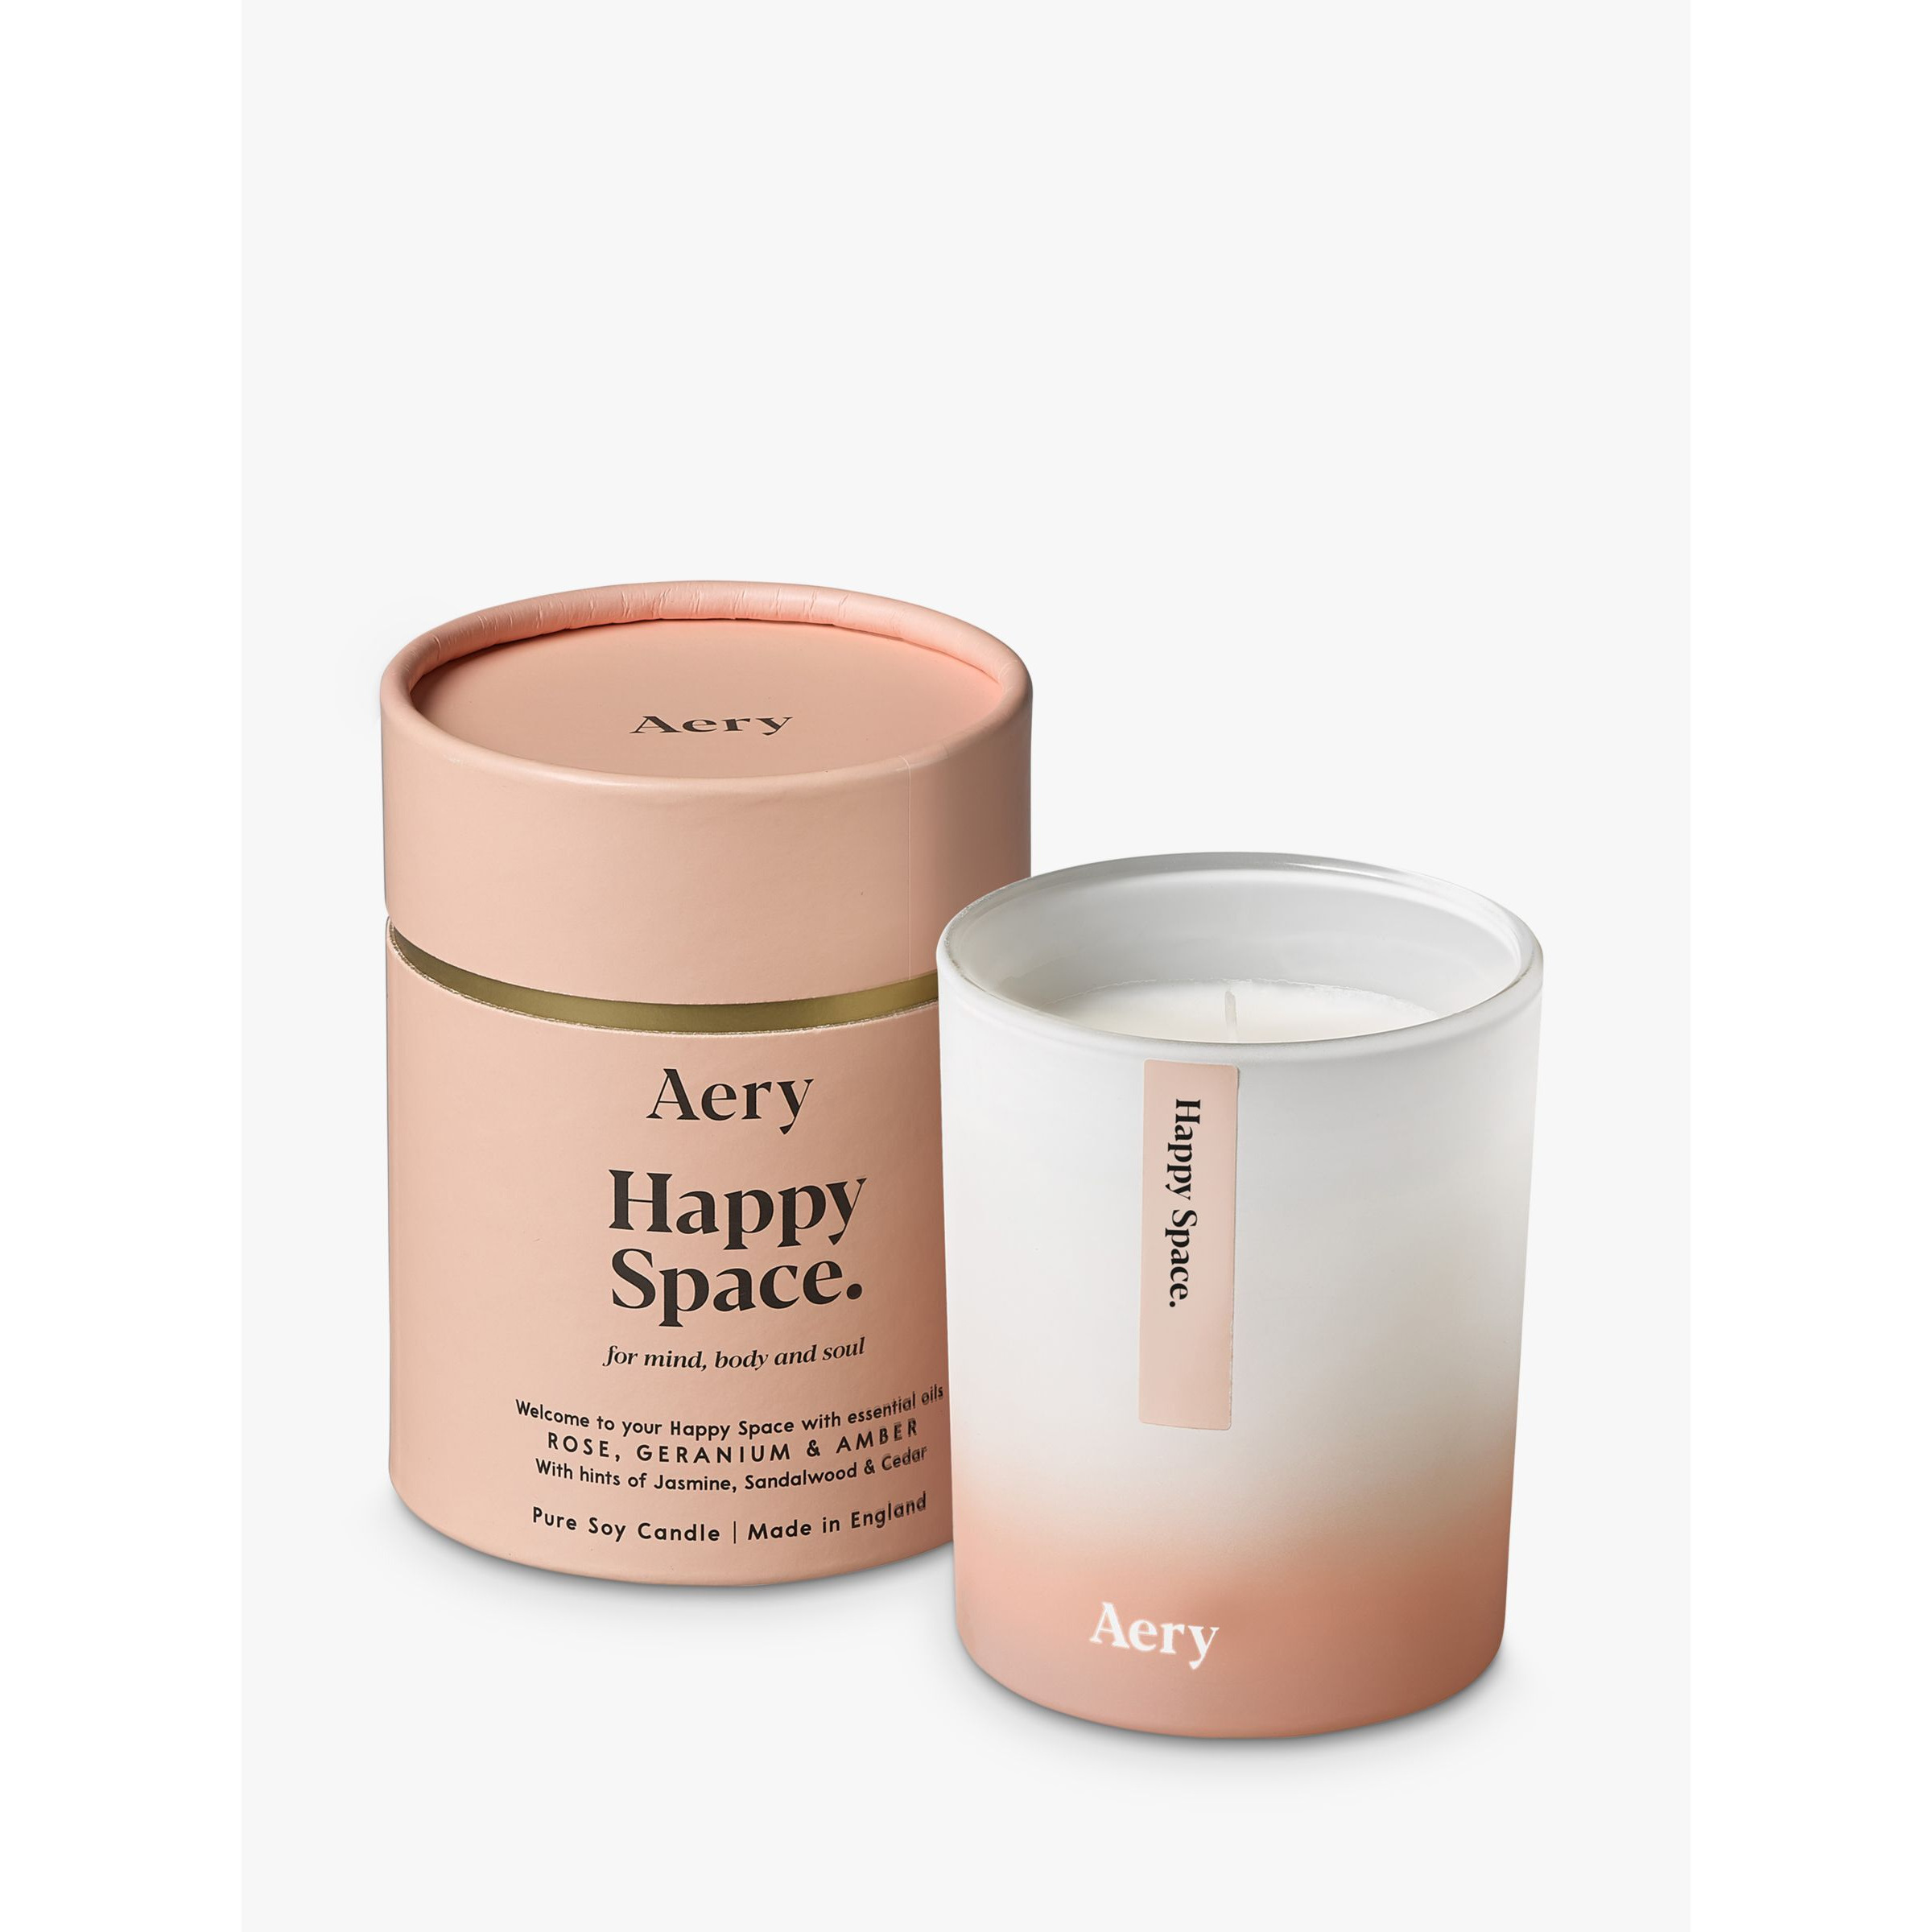 Aery Happy Space Scented Candle, 200g - image 1